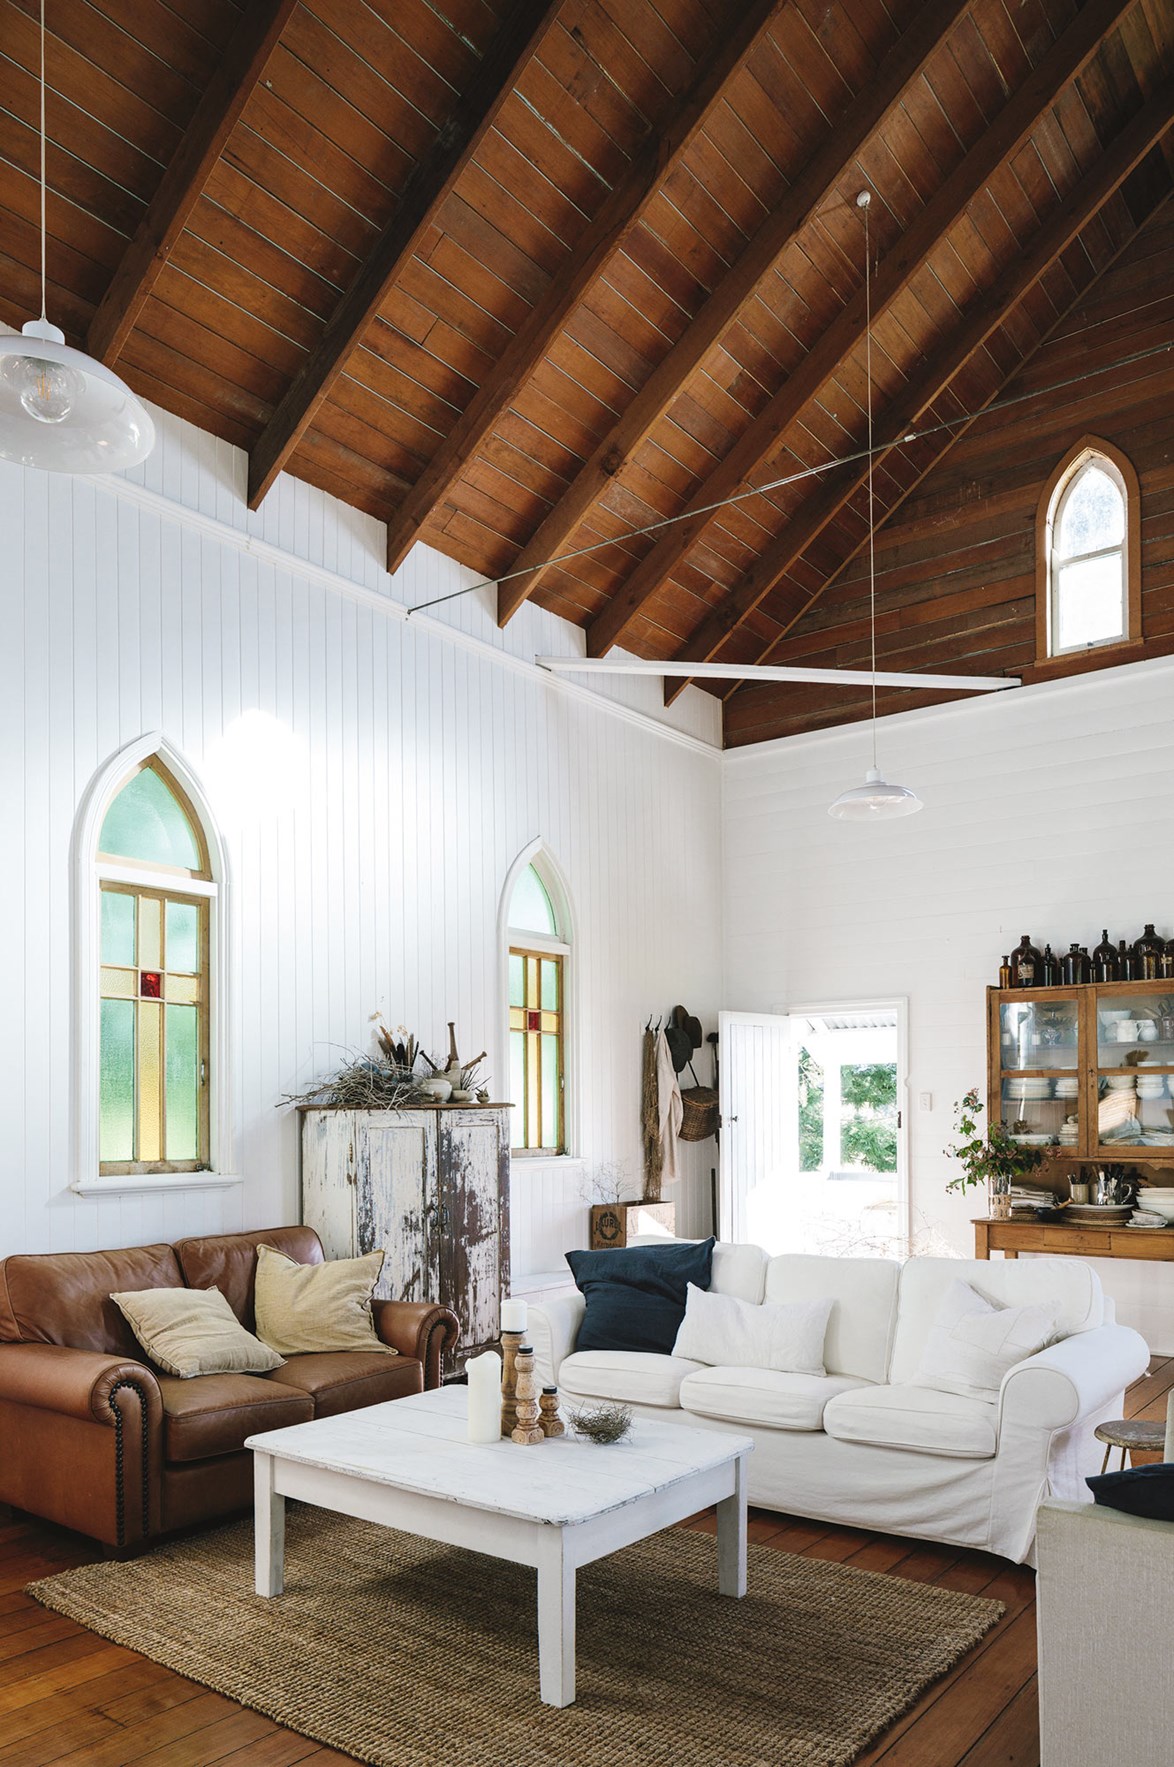 A divine living room was created in this open-plan [church-turned-home](https://www.homestolove.com.au/restored-qld-church-full-of-divine-treasures-13984|target="_blank"). A natural colour palette echoes the timber tones of the impressive cathedral ceiling. "I love things that are weathered and tell the story of where they came from," says the homeowner.